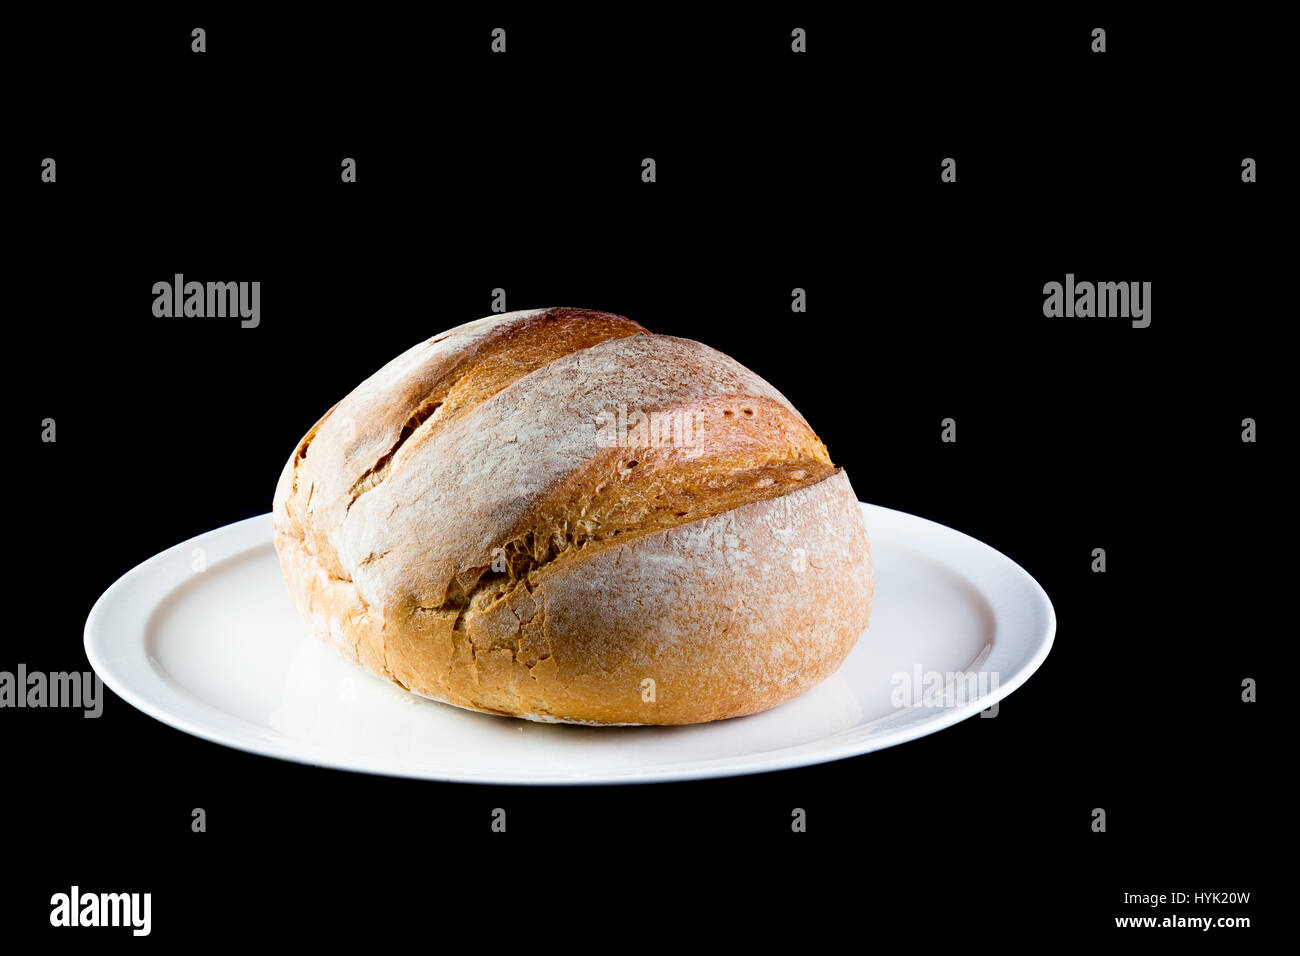 Full rustic medieval loaf of bread homemade baked isolated on black background Stock Photo